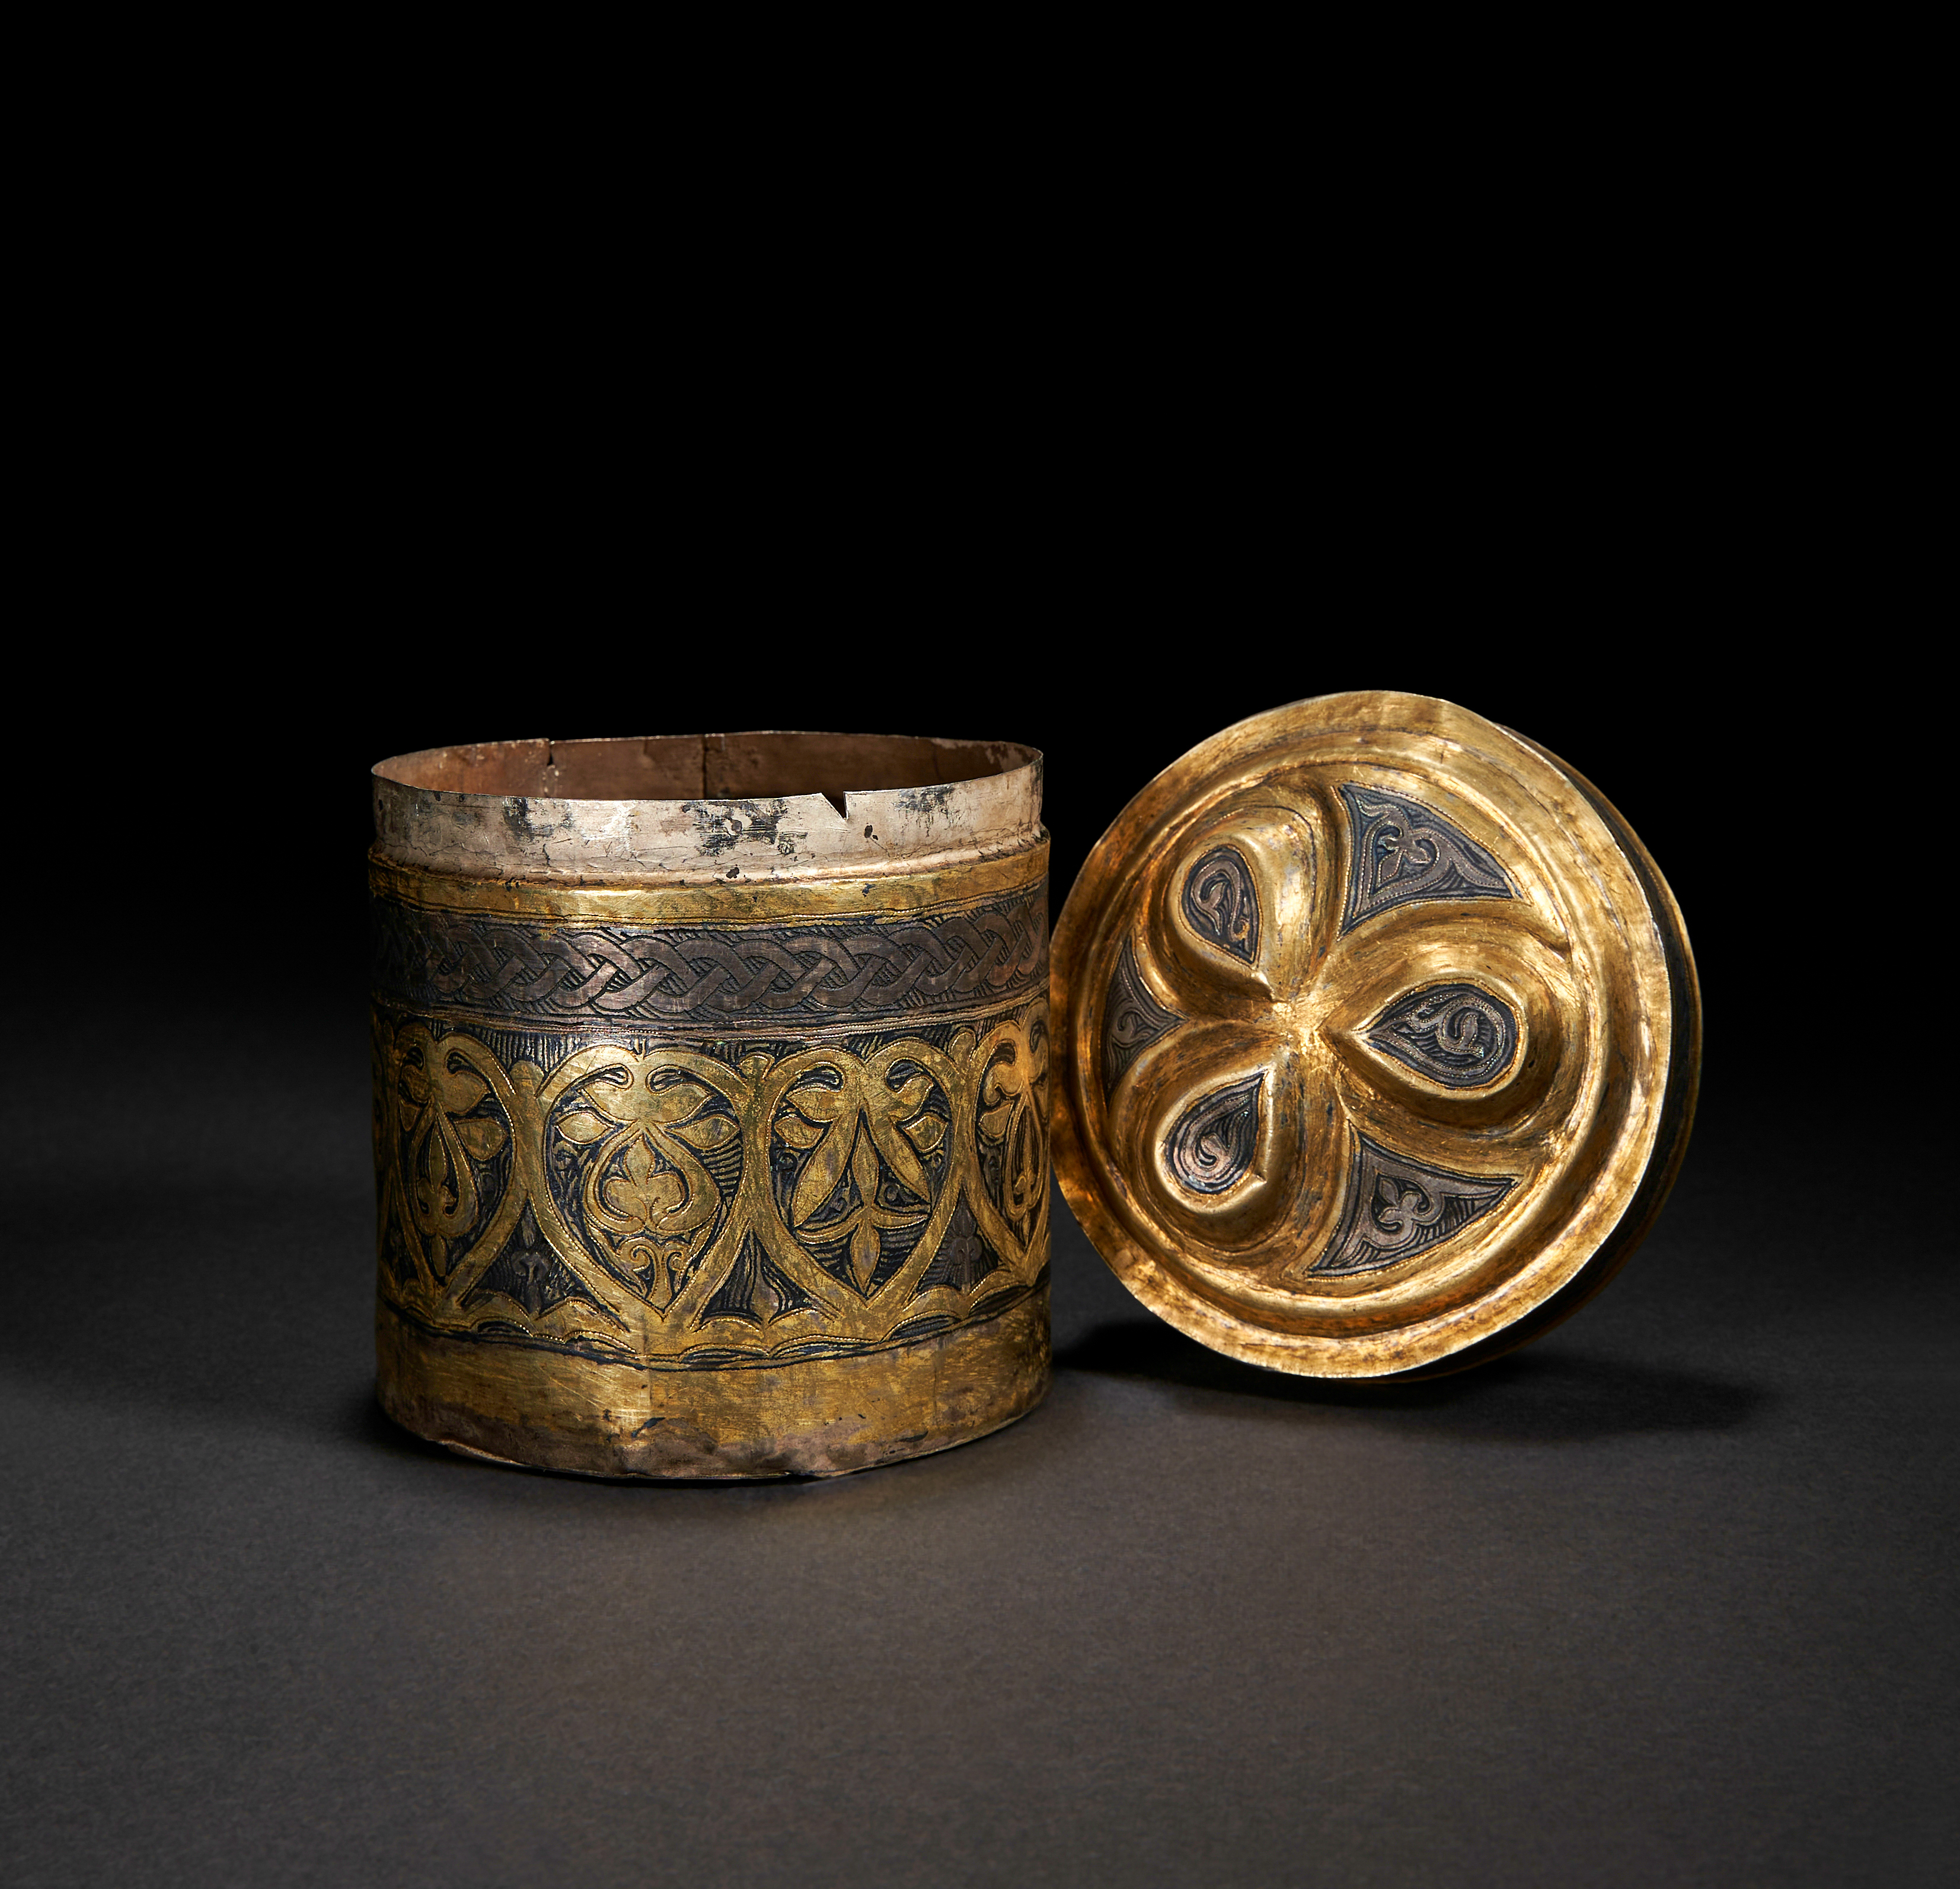 AN IMPORTANT PARCEL-GILT SILVER PYXIS, CENTRAL ASIA OR CILICIAN ARMENIA, 7TH-10TH CENTURY - Image 3 of 6